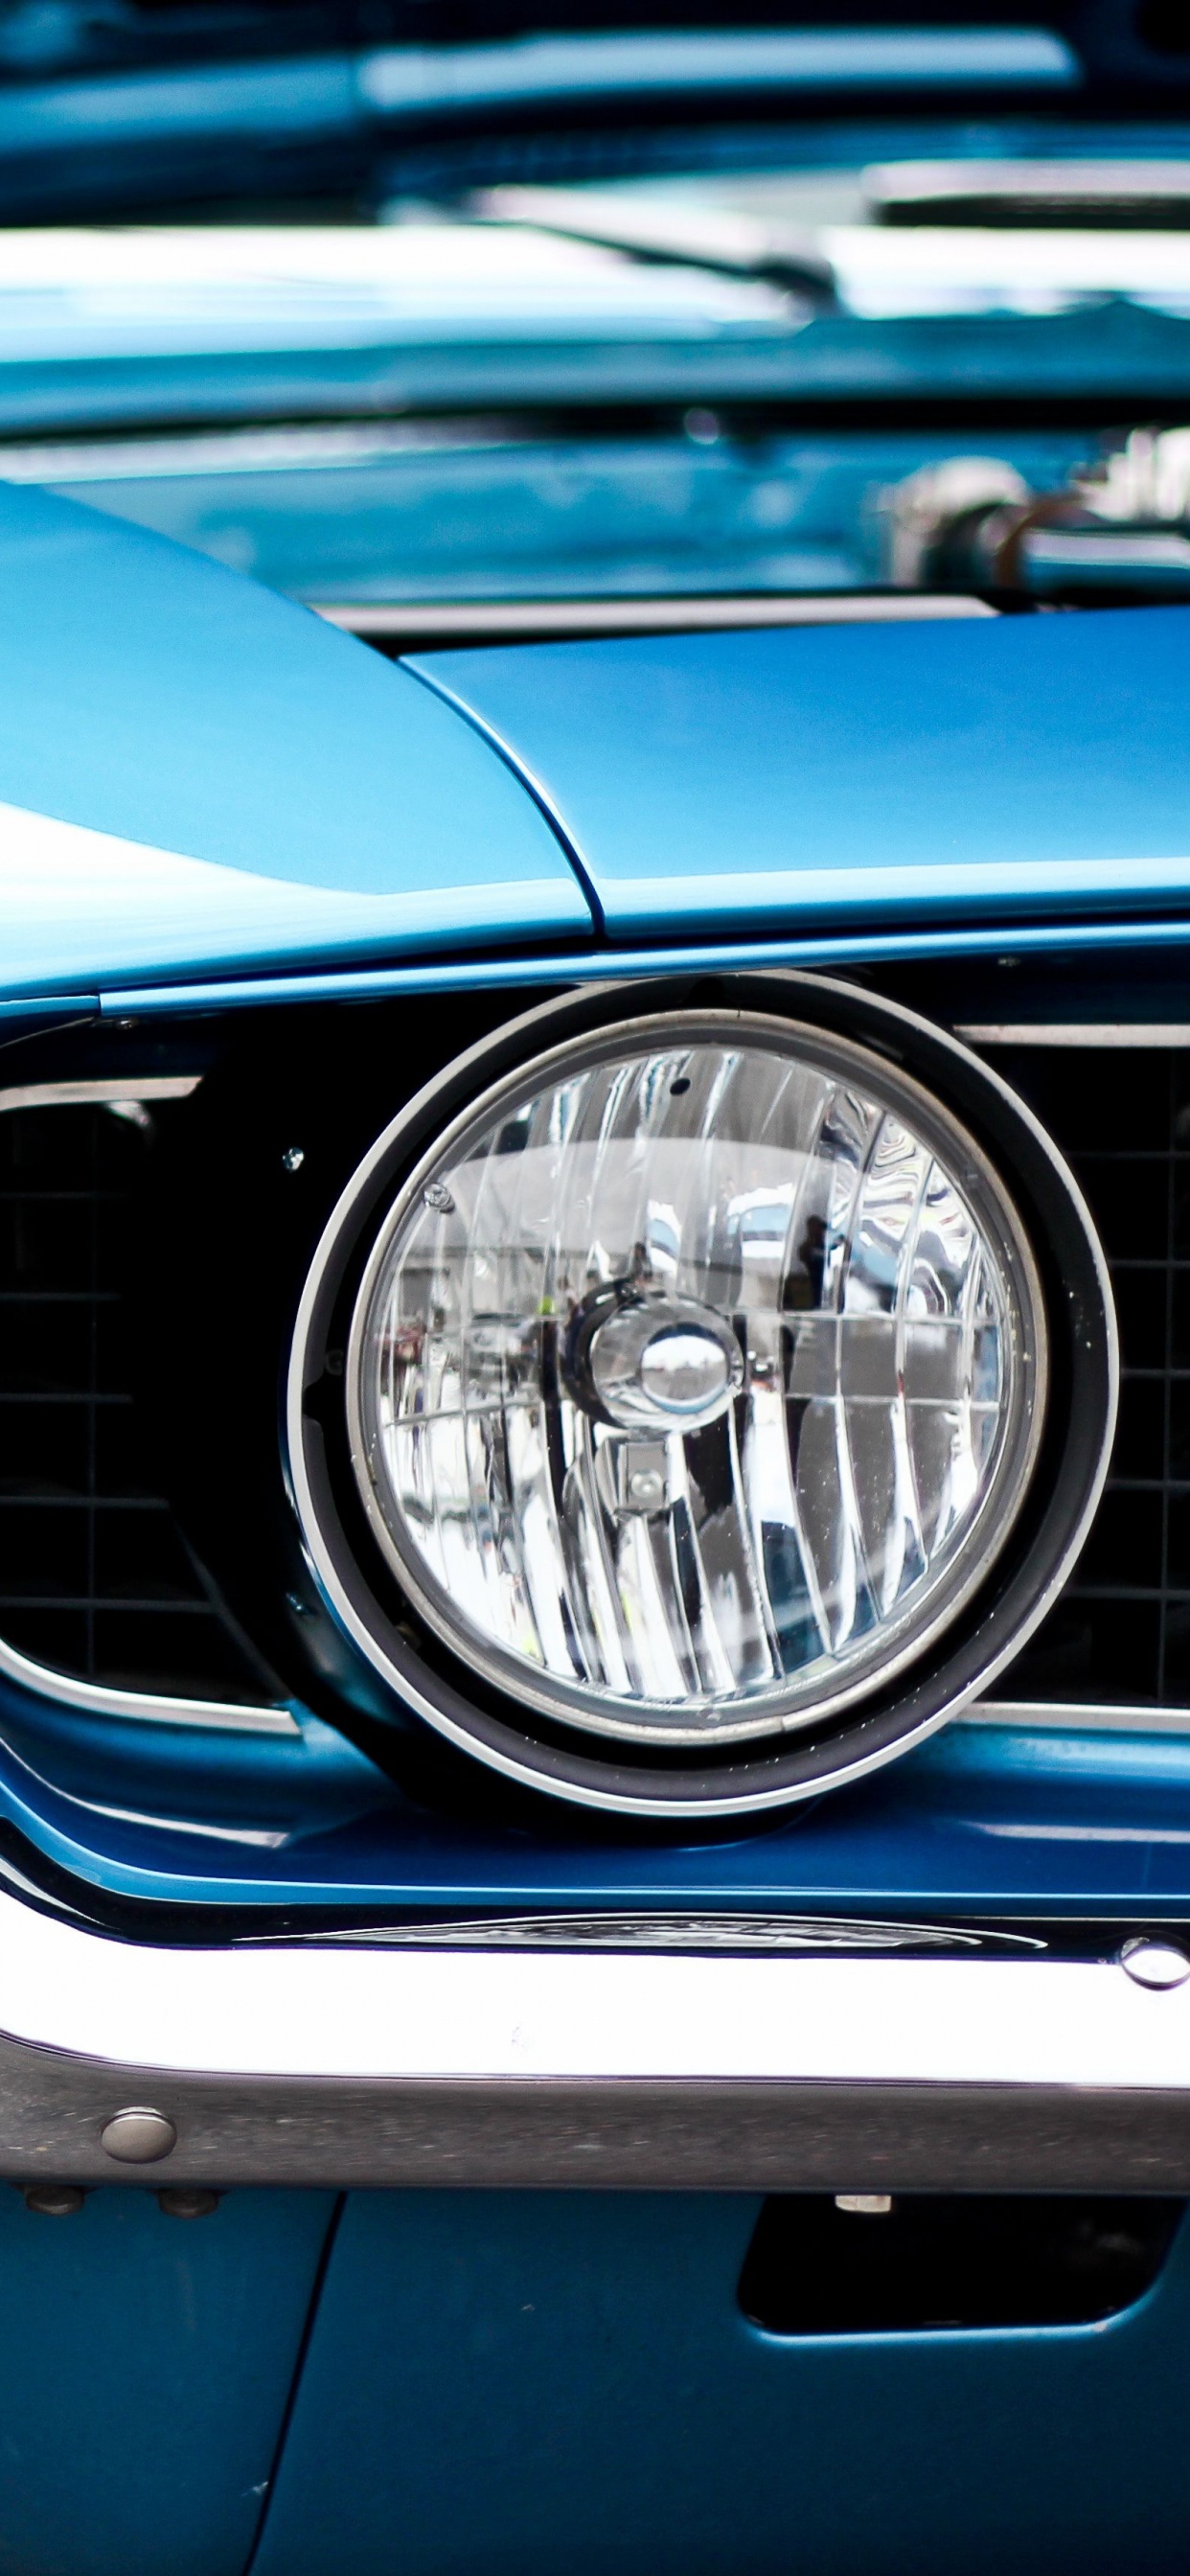 Blue Car With Chrome Wheel. Wallpaper in 1242x2688 Resolution